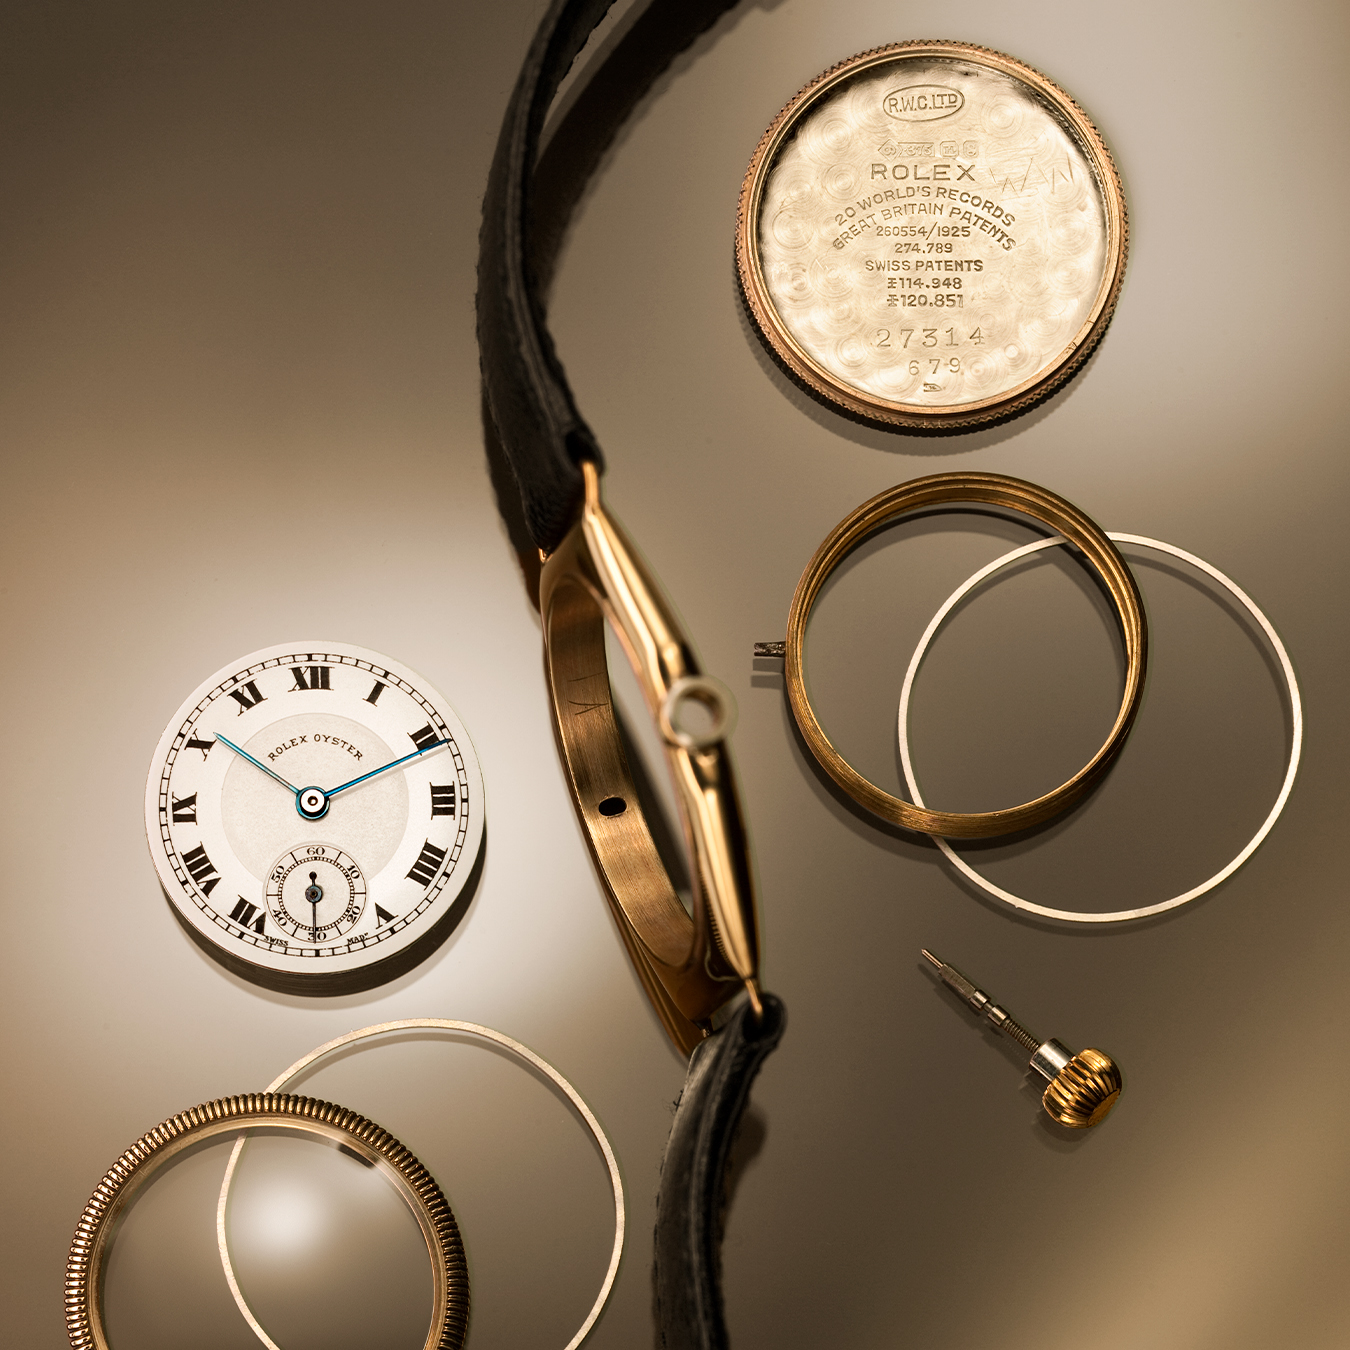 Rolex and the championships, Wimbledon – Moody's 1883 – Nantwich  JewellersMoody's 1883